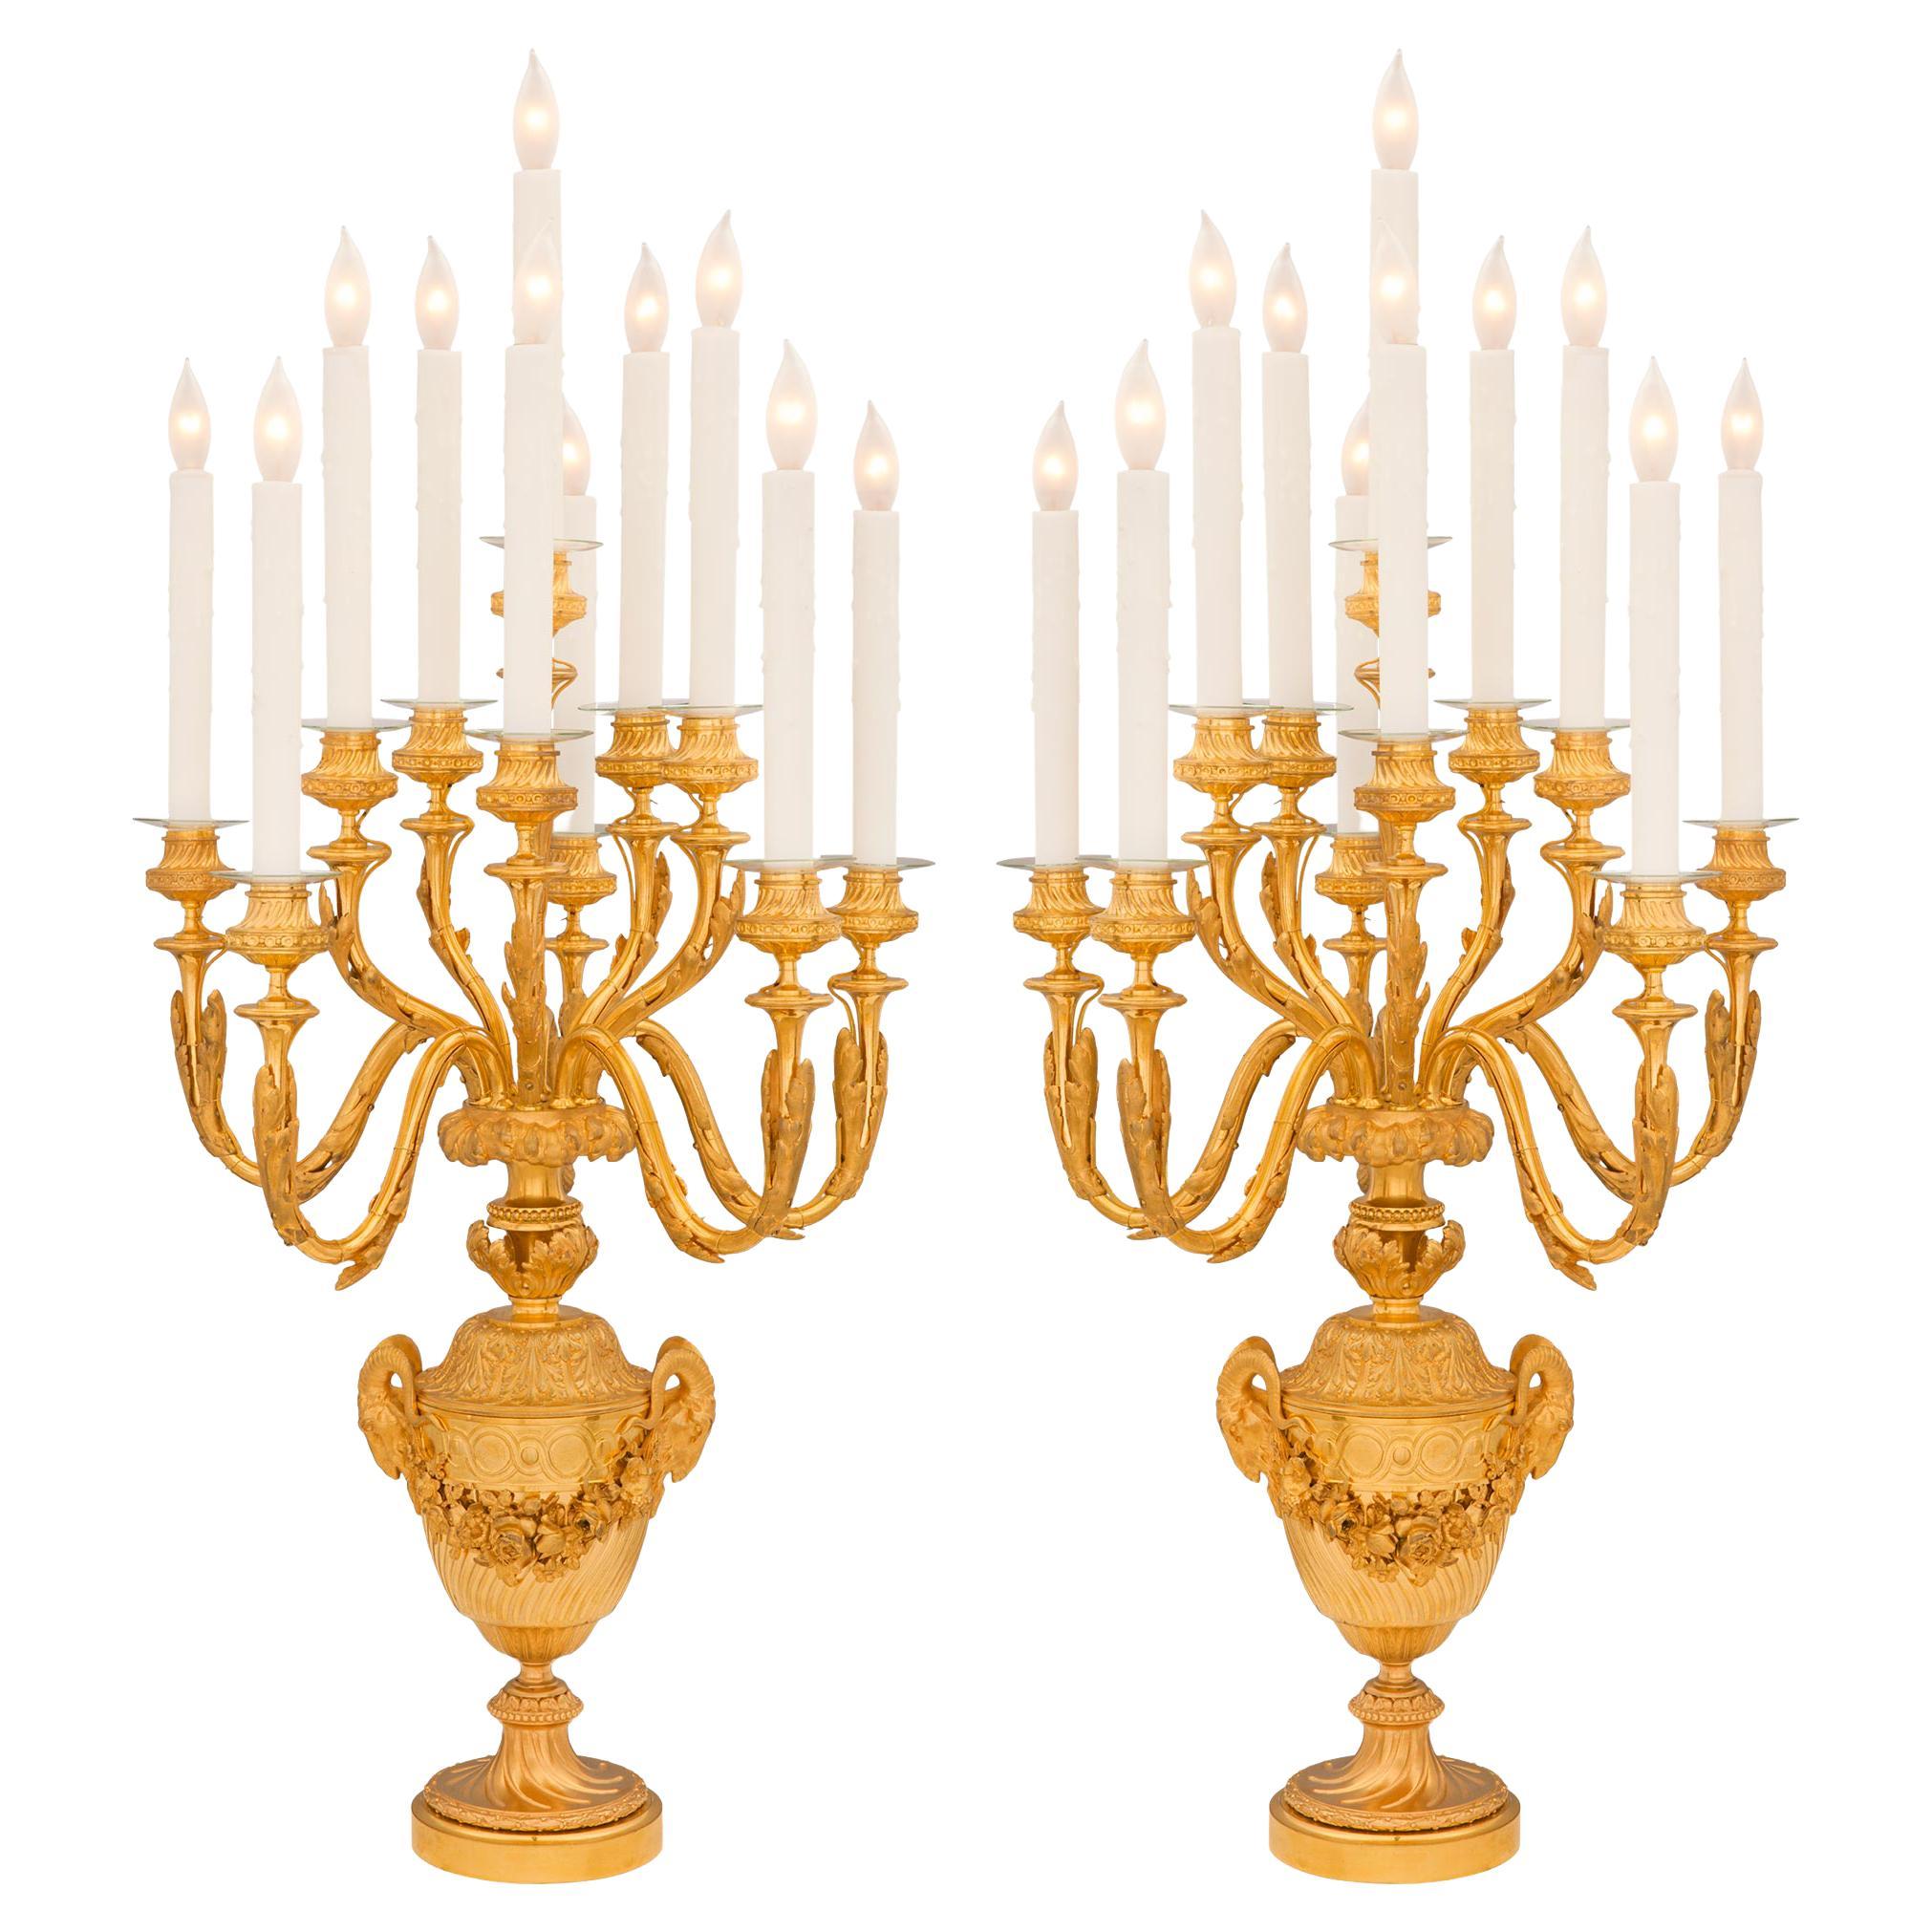 Pair of French 19th Century Louis XVI St. Electrified Ormolu Candelabras For Sale